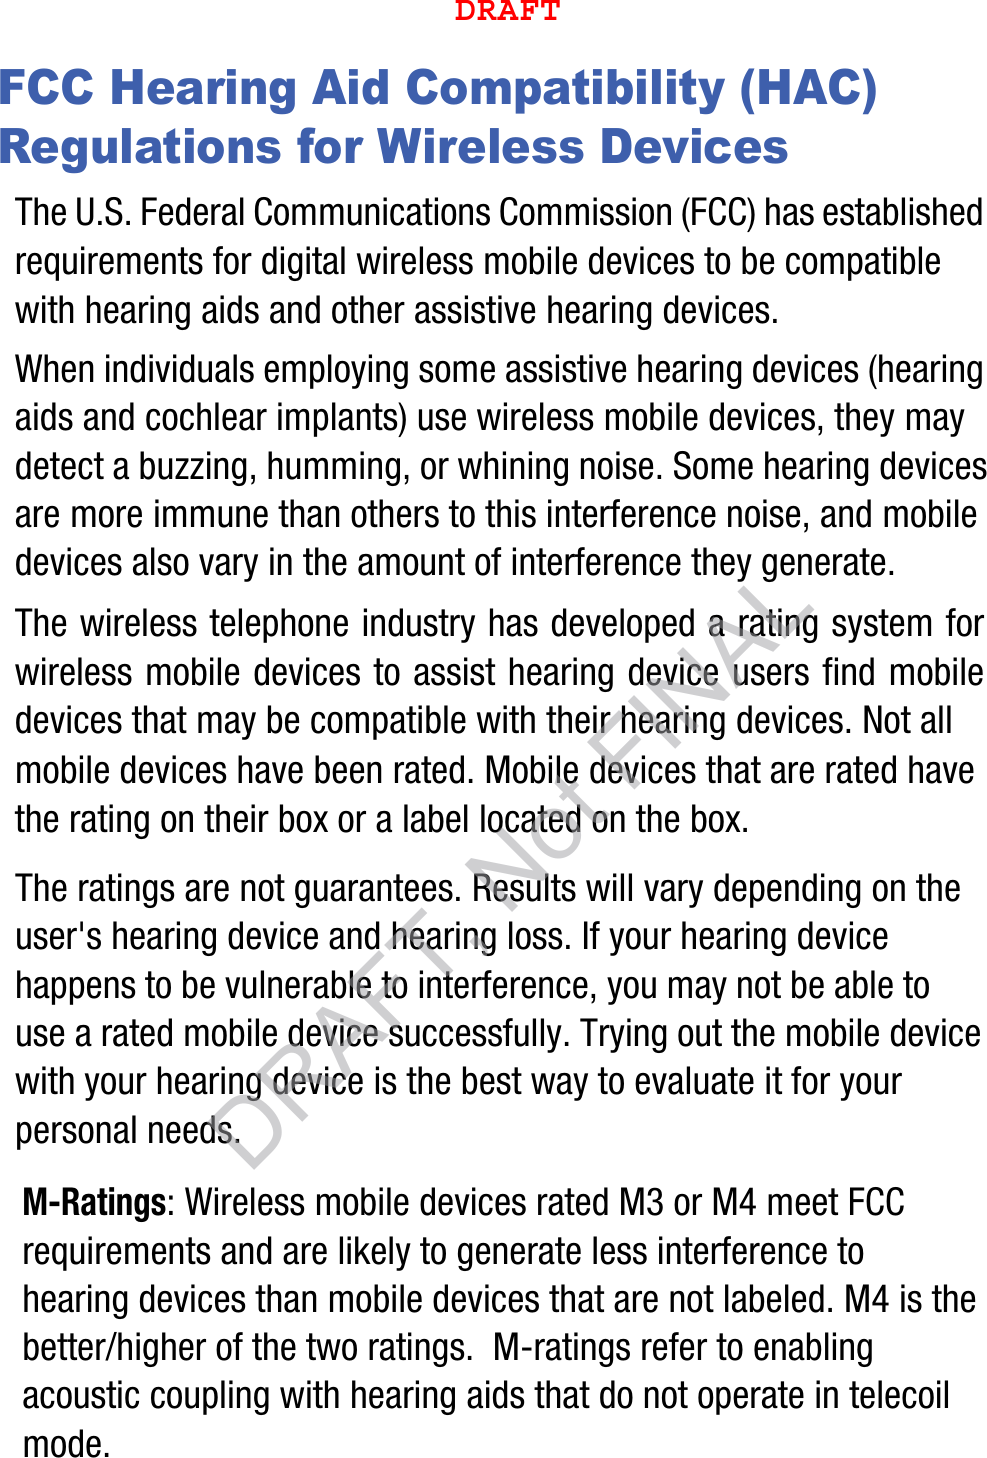 FCC Hearing Aid Compatibility (HAC) Regulations for Wireless DevicesThe U.S. Federal Communications Commission (FCC) has established requirements for digital wireless mobile devices to be compatible with hearing aids and other assistive hearing devices.When individuals employing some assistive hearing devices (hearing aids and cochlear implants) use wireless mobile devices, they may detect a buzzing, humming, or whining noise. Some hearing devices are more immune than others to this interference noise, and mobile devices also vary in the amount of interference they generate.The wireless telephone industry has developed a rating system for wireless mobile devices to assist hearing device users find mobile devices that may be compatible with their hearing devices. Not all mobile devices have been rated. Mobile devices that are rated have the rating on their box or a label located on the box.The ratings are not guarantees. Results will vary depending on the user&apos;s hearing device and hearing loss. If your hearing device happens to be vulnerable to interference, you may not be able to use a rated mobile device successfully. Trying out the mobile device with your hearing device is the best way to evaluate it for your personal needs.M-Ratings: Wireless mobile devices rated M3 or M4 meet FCC requirements and are likely to generate less interference to hearing devices than mobile devices that are not labeled. M4 is the better/higher of the two ratings.  M-ratings refer to enabling acoustic coupling with hearing aids that do not operate in telecoil mode.DRAFTDRAFT, Not FINAL